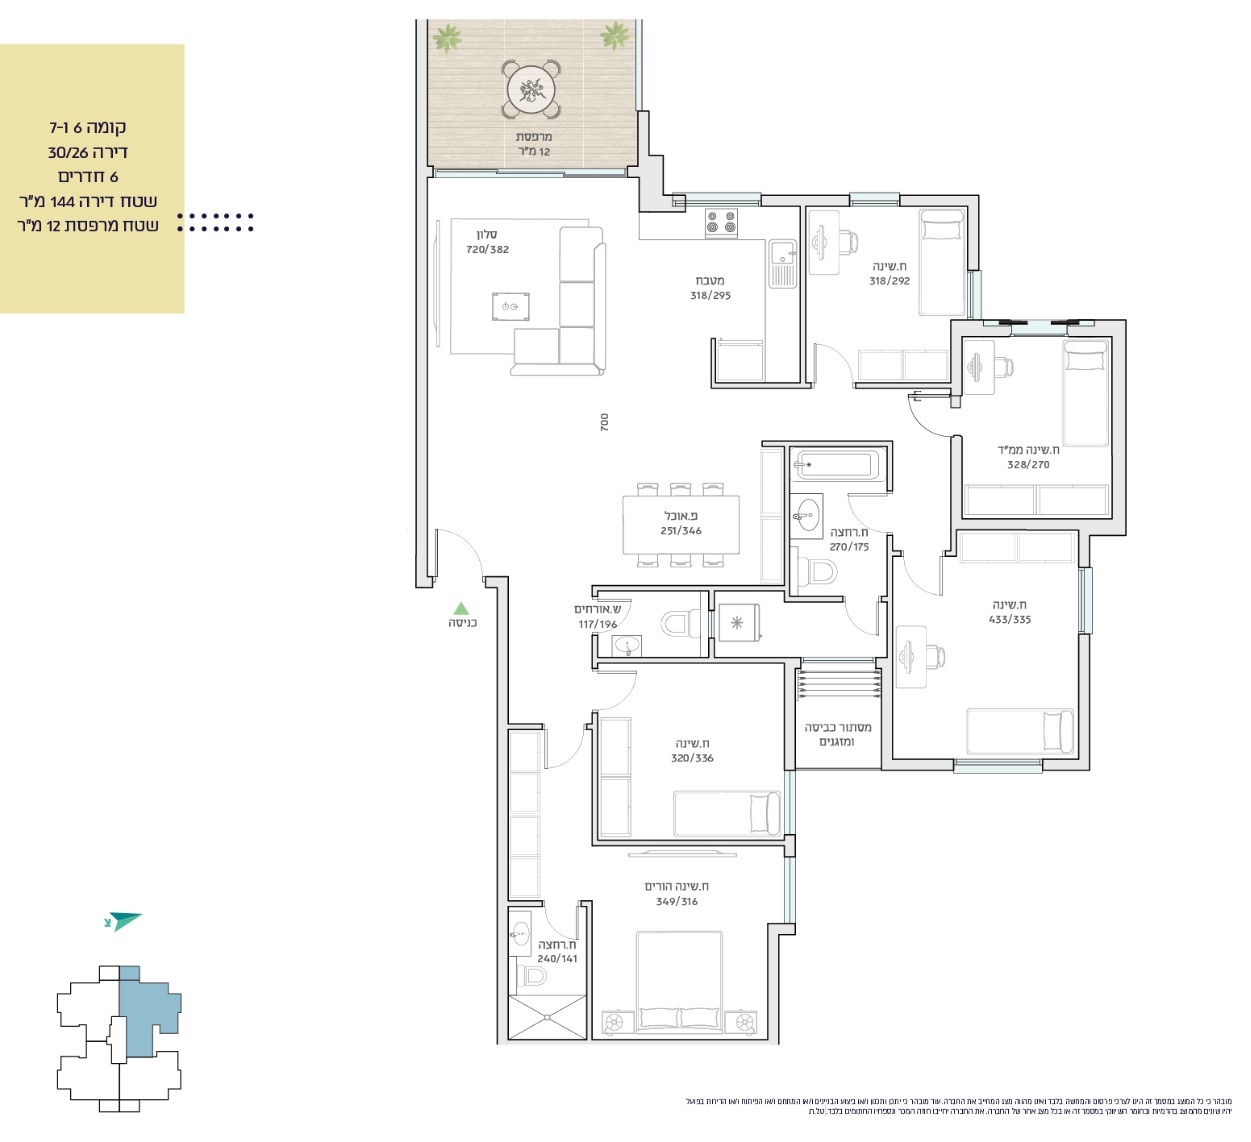 6 rooms of 144 m2 with a terrace of 12 m2